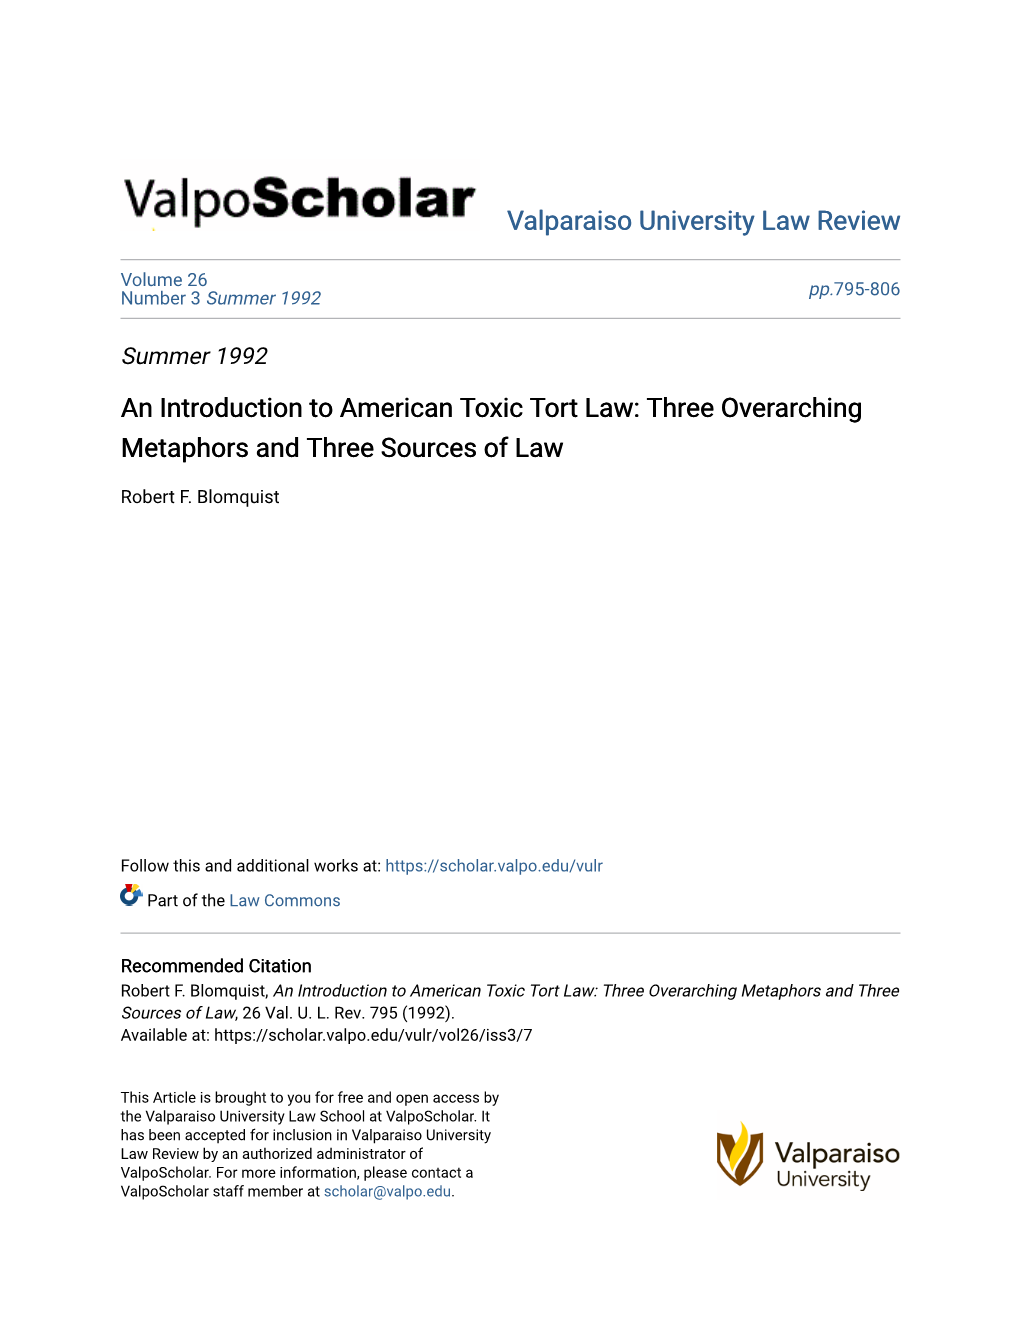 An Introduction to American Toxic Tort Law: Three Overarching Metaphors and Three Sources of Law